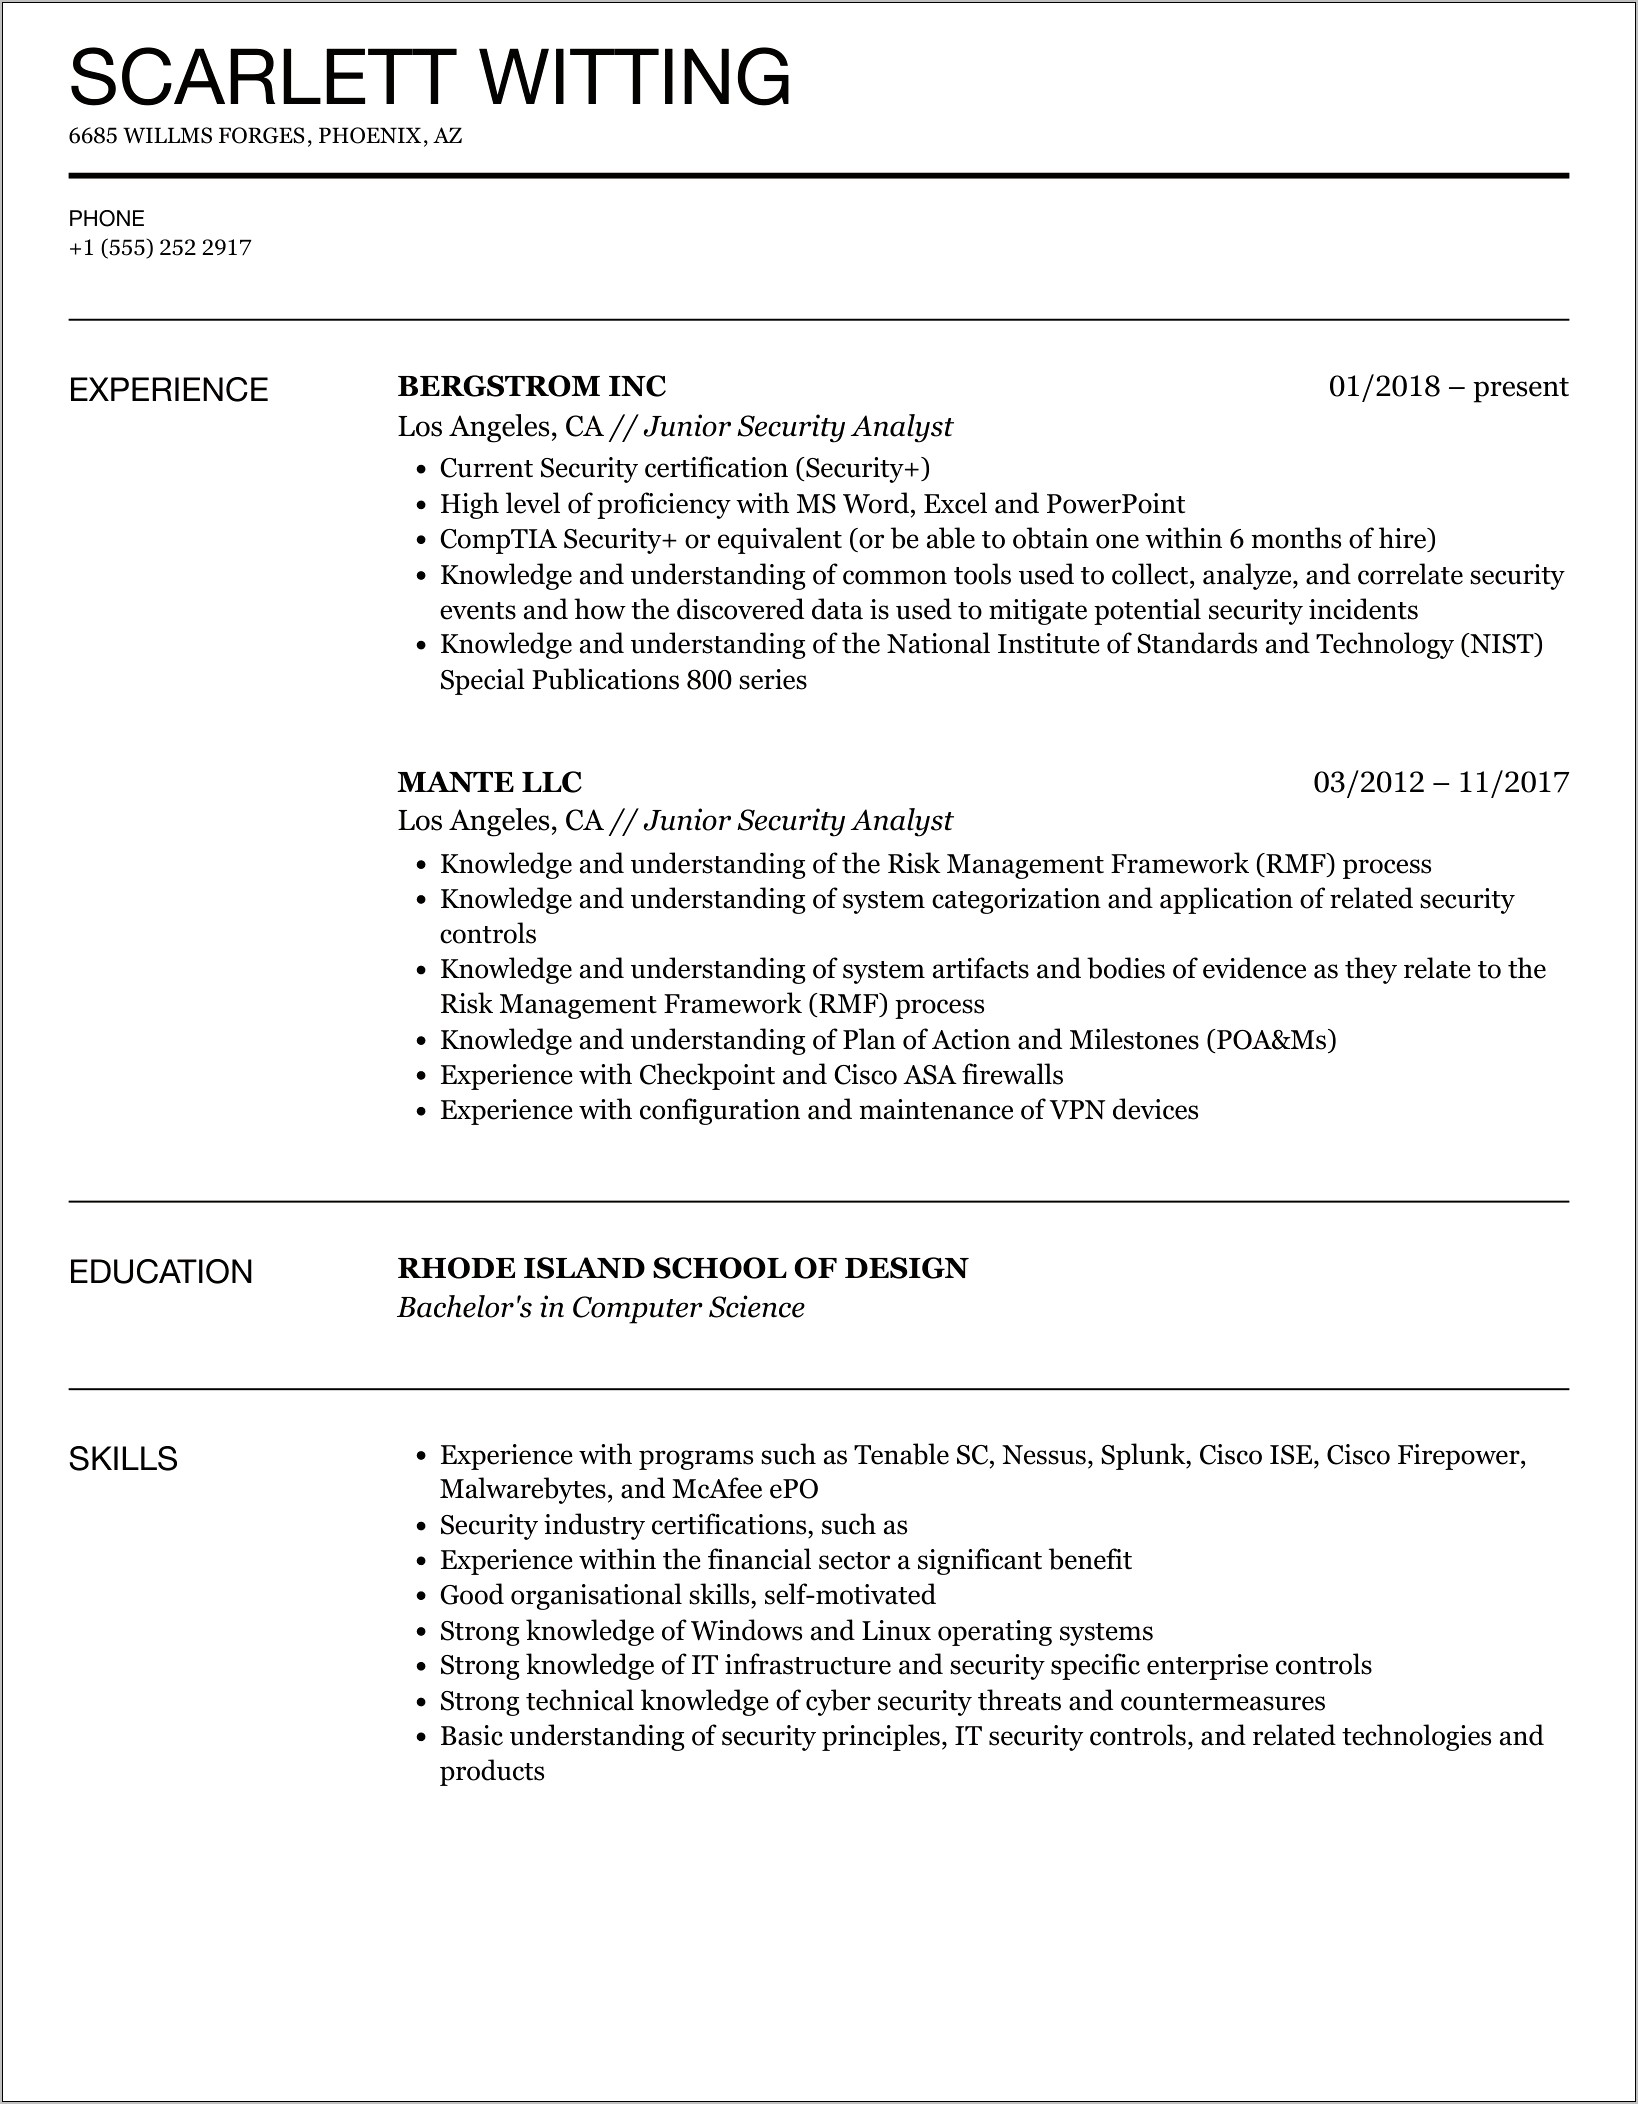 Objective Resume Cyber Security Analyst